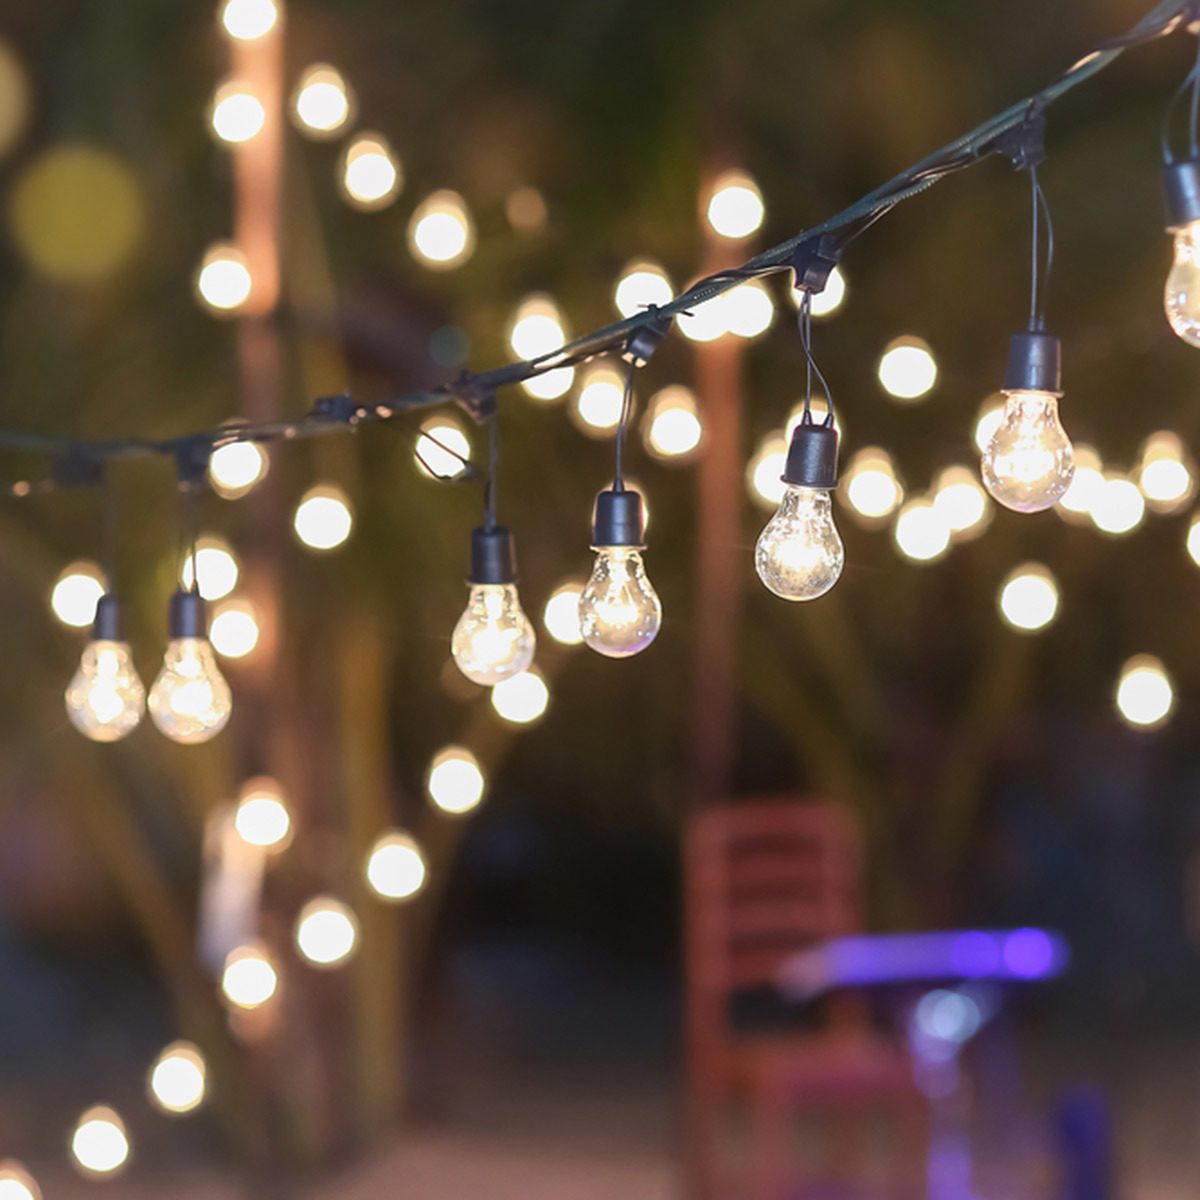 Hang battery- or solar-powered string lights to light up your cozy  car-sleeping evenings.